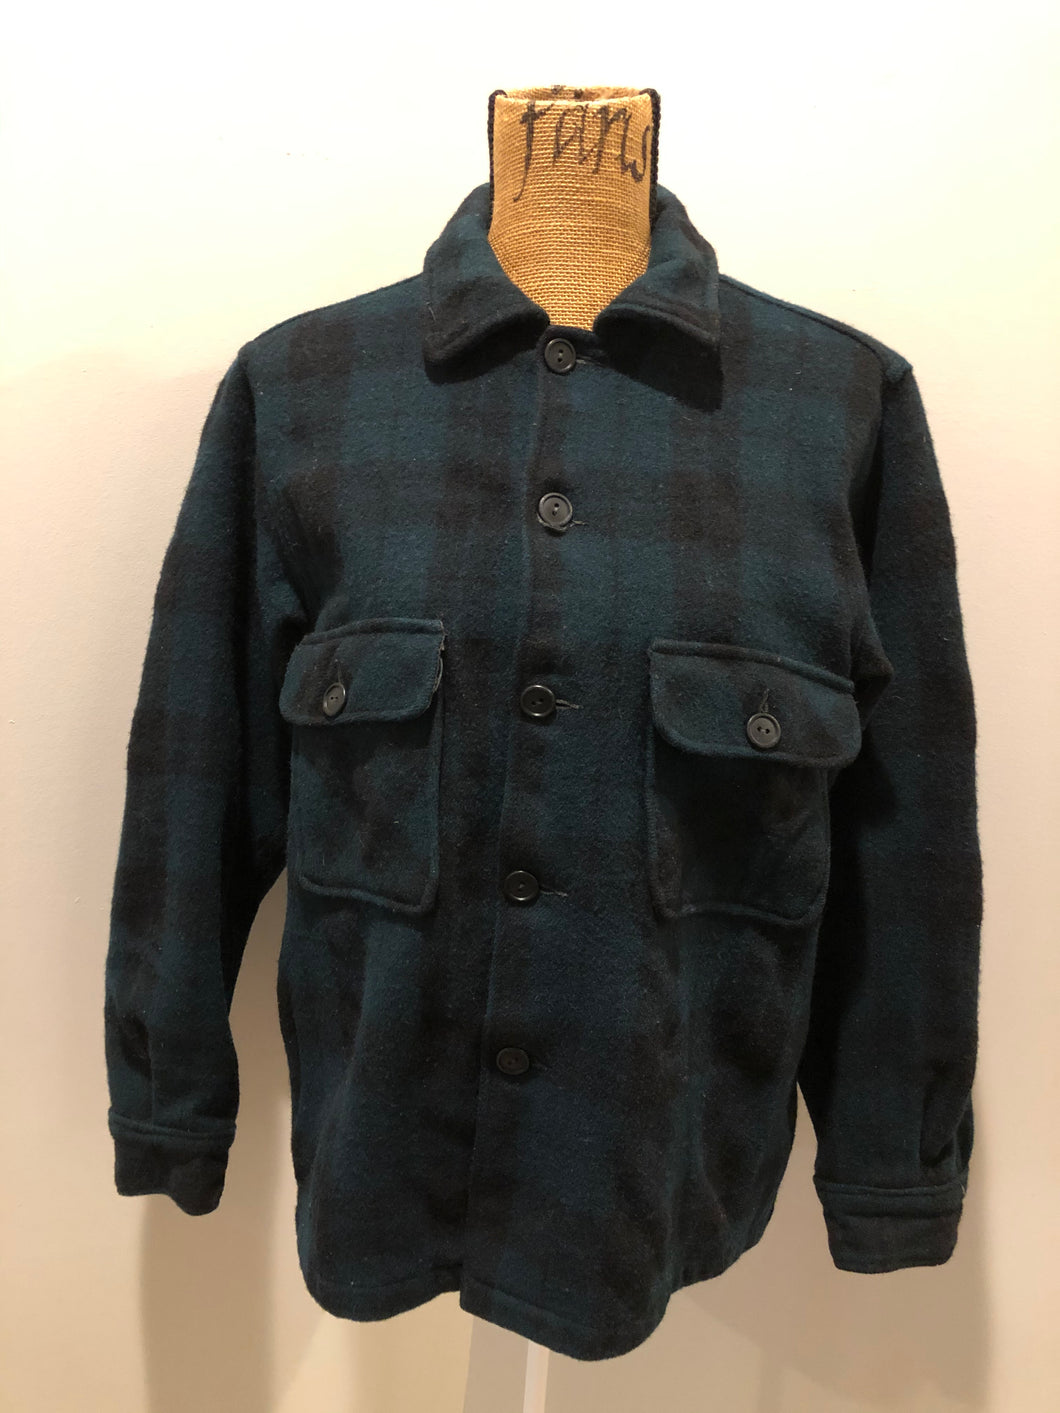 Kingspier Vintage - Woolrich dark green plaid wool lumberjack shirt with button closures and two flap pockets on the chest.